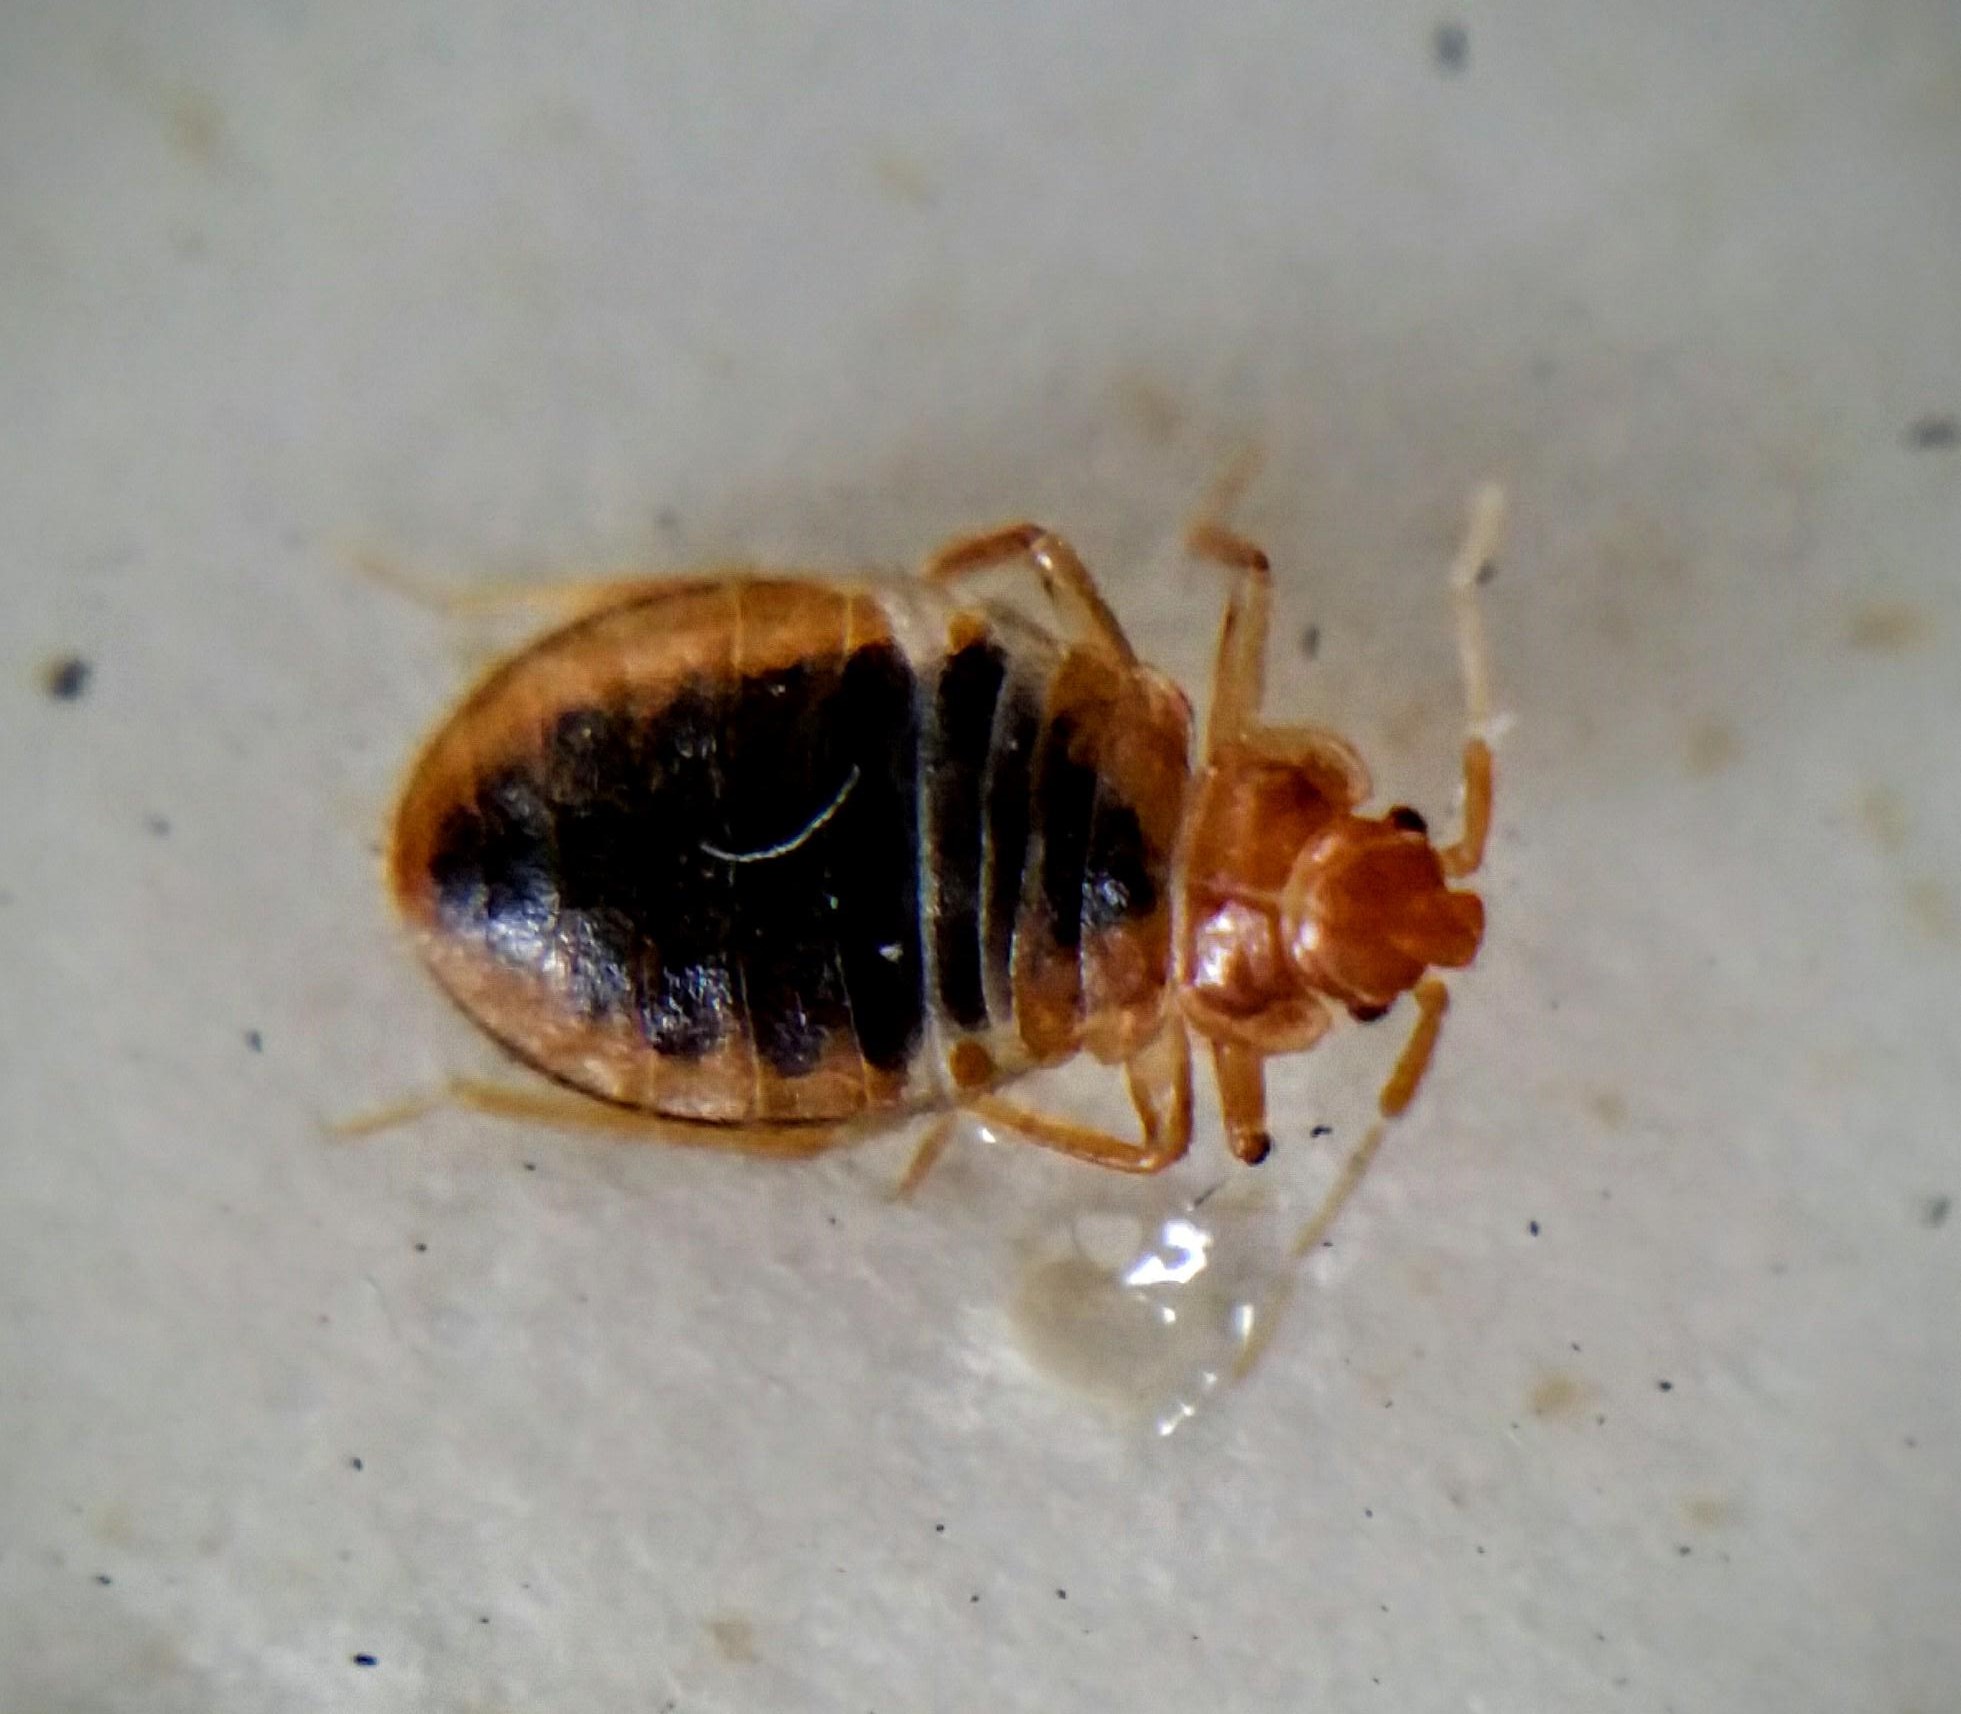 Does your hometown rank amongst the worst with bed bugs?